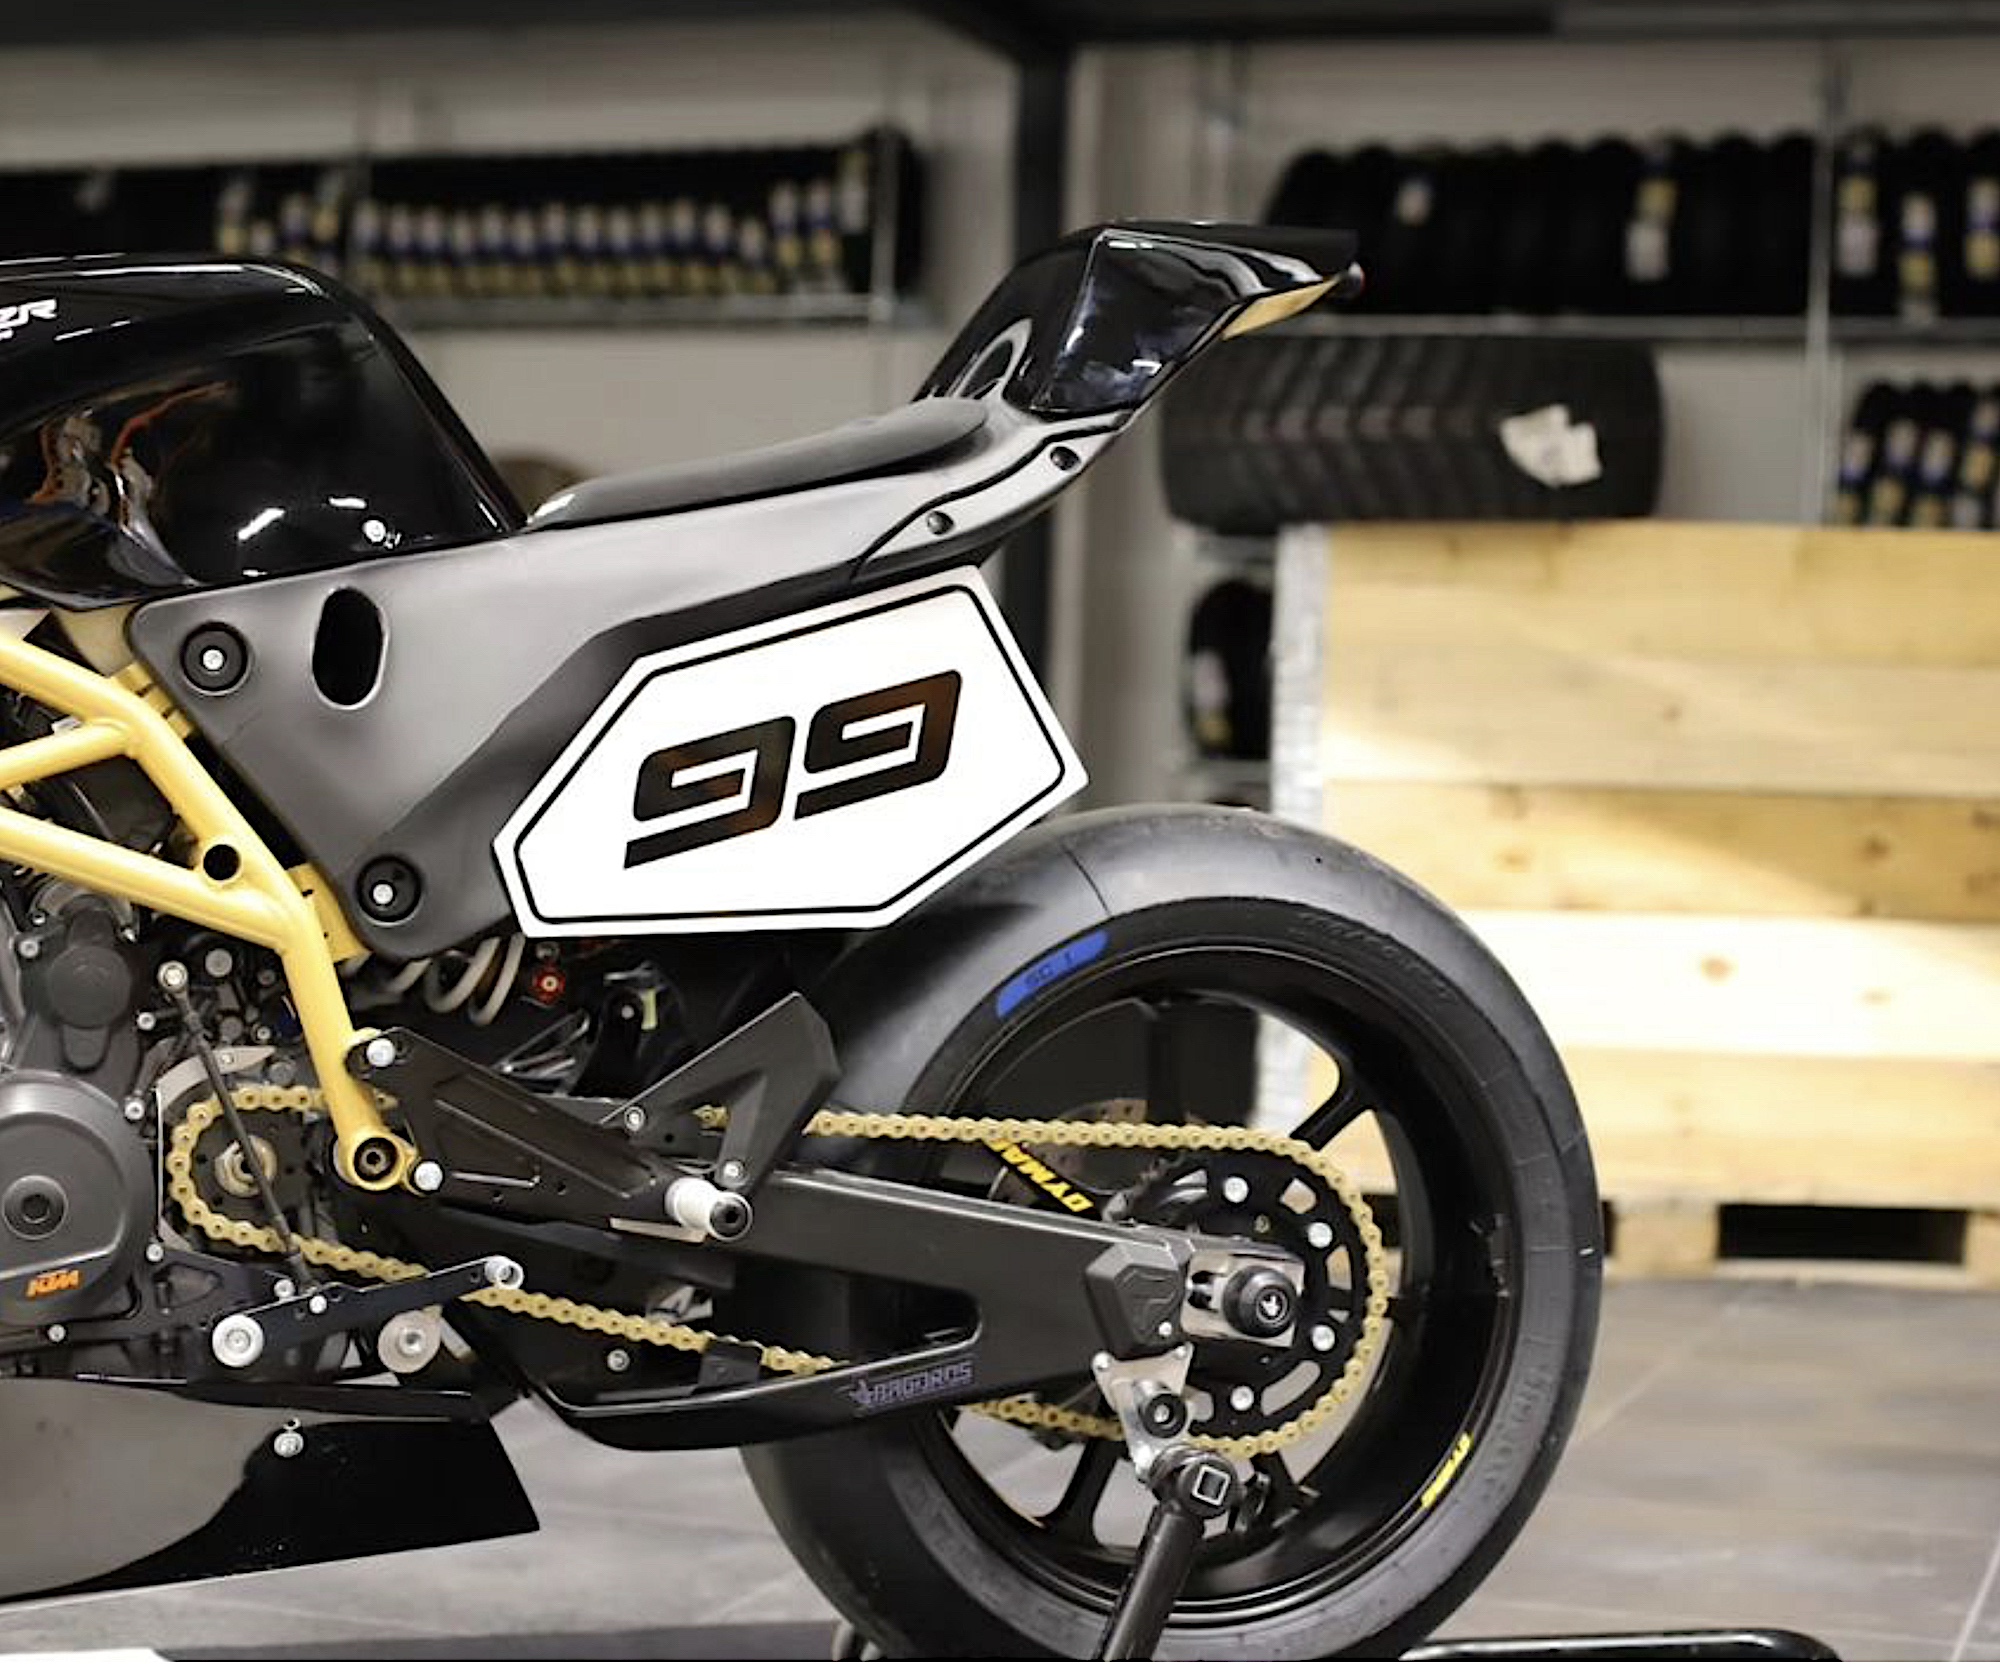 A view of the Krämer Super Hooligan Concept motorcycle.